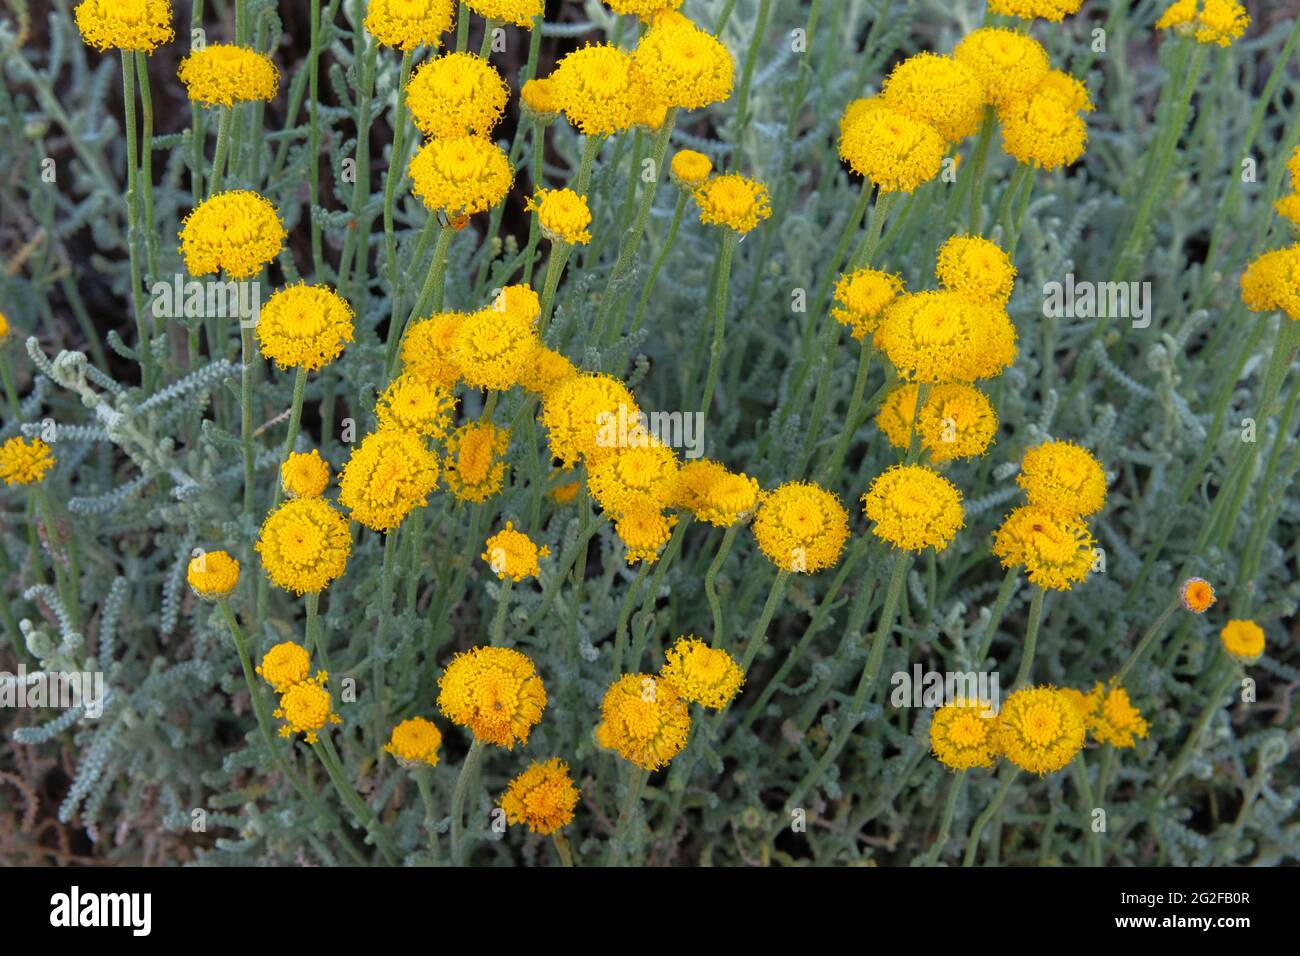 Helichrysum flowers on green nature blurred background. Yellow flowers for herbalism. Medicinal herb. Stock Photo